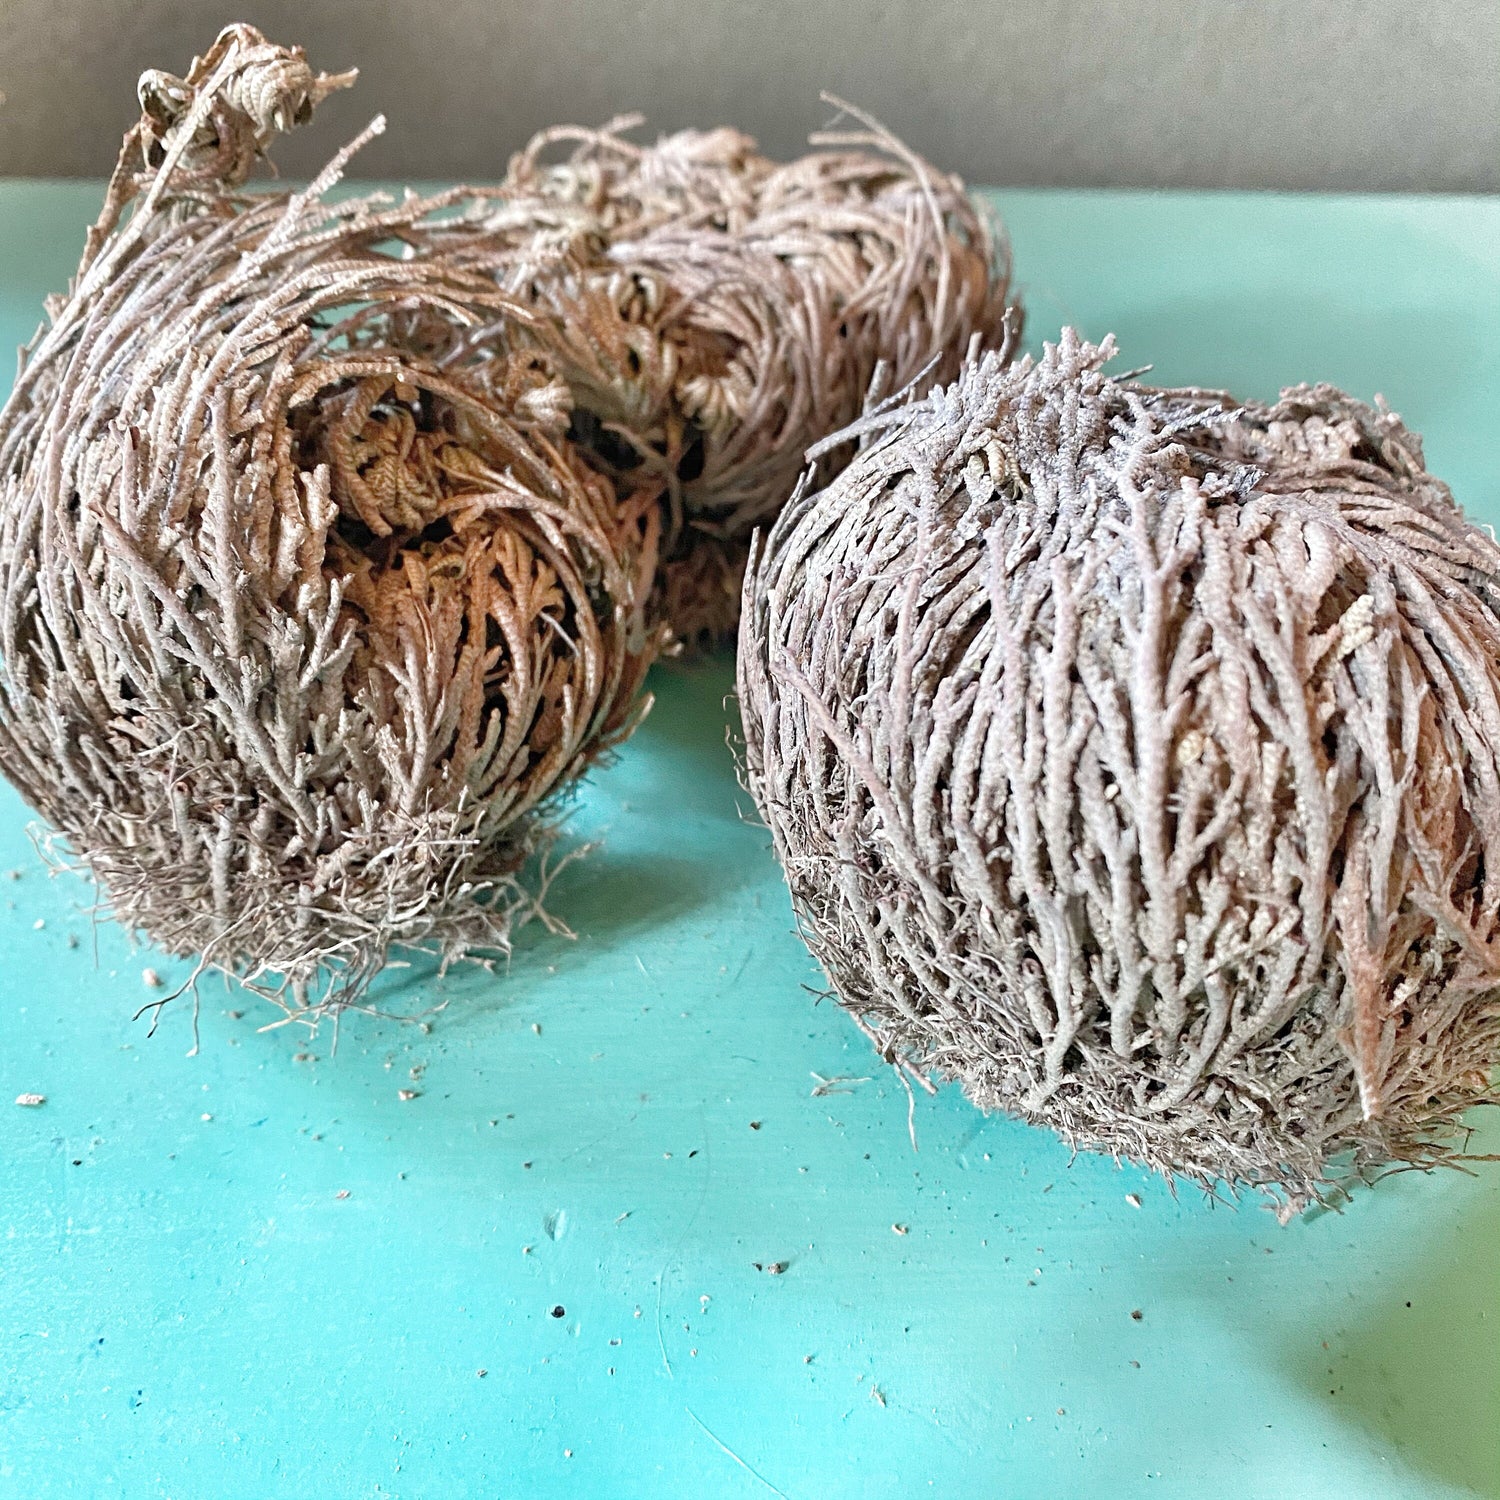 Dried Rose of Jericho plants on a teal background, showcasing the unique, curled structure of these &